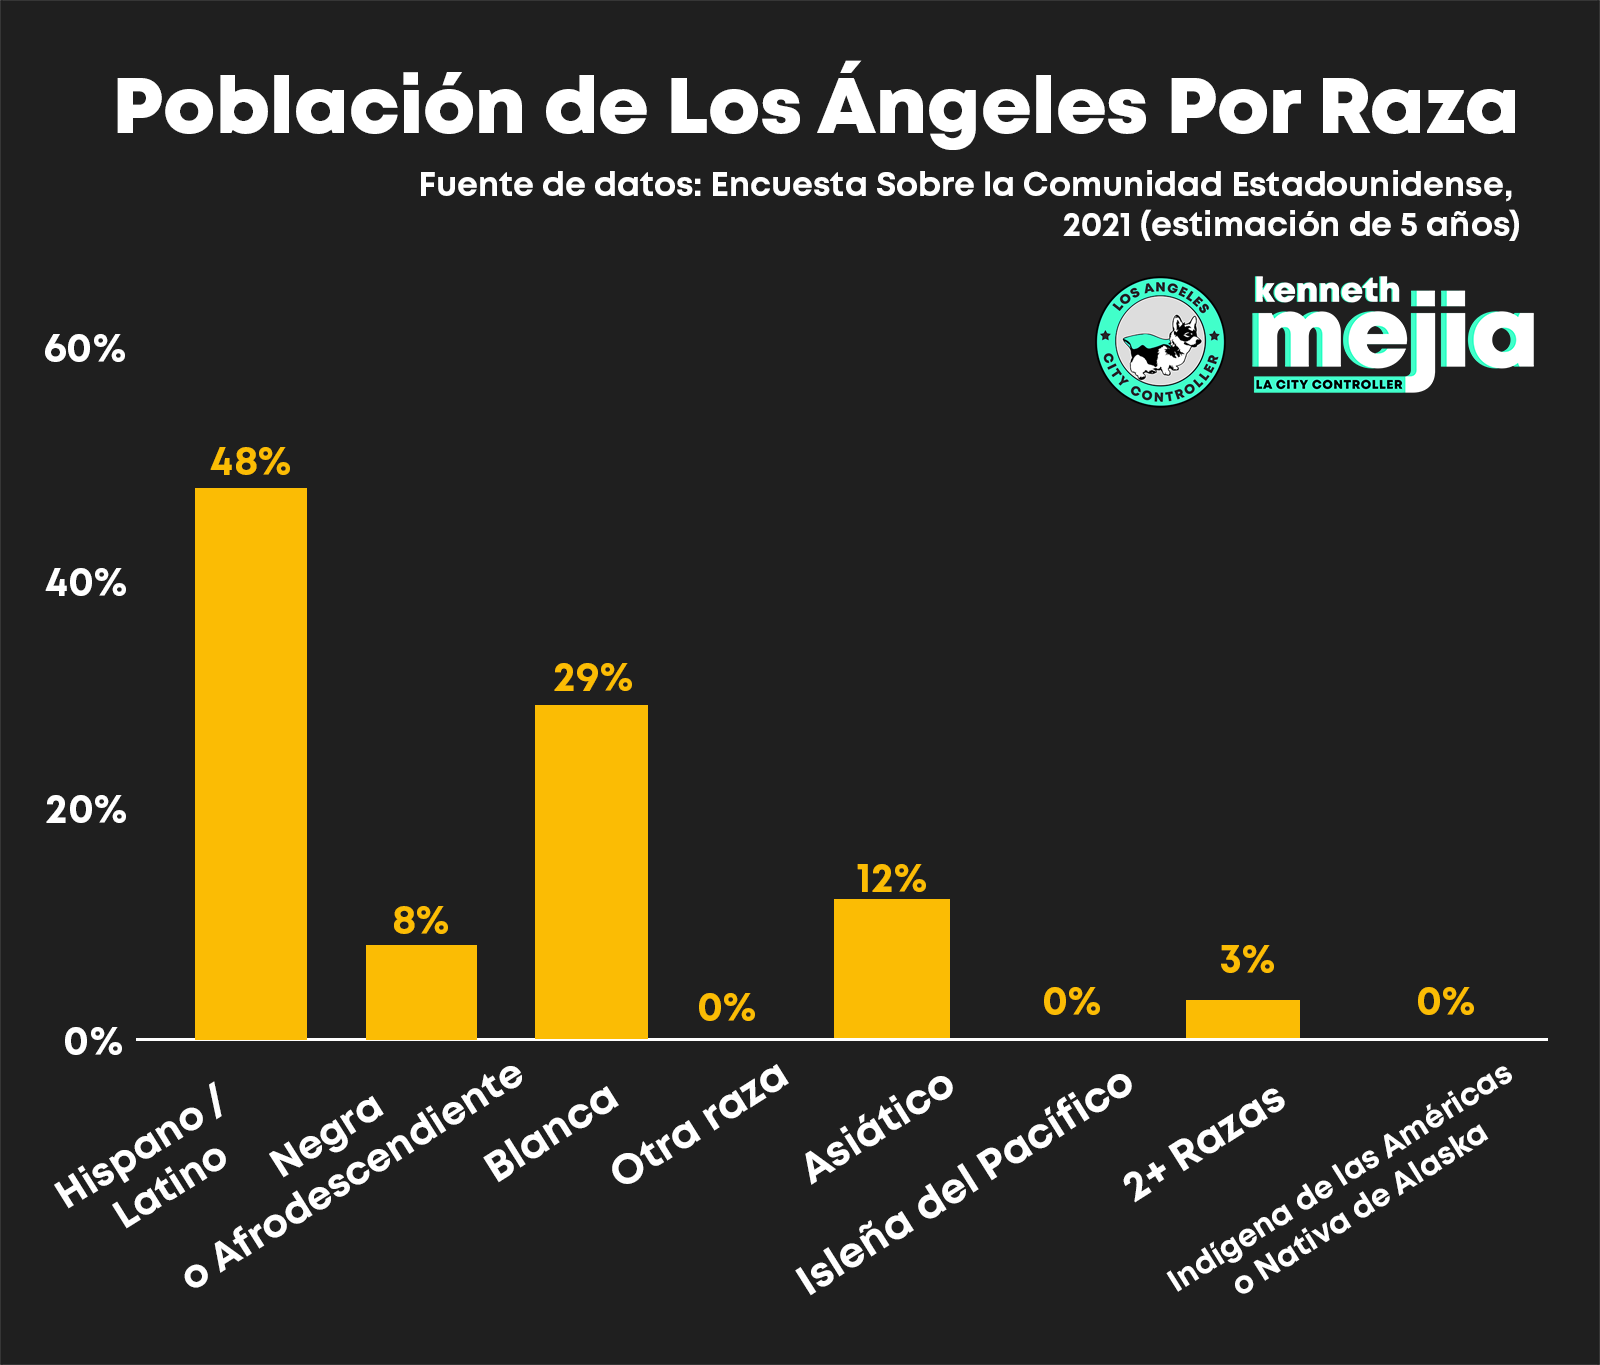 A bar chart of Los Angeles Population by Race.  Hispanic/Latino is 48%.  Black is 8%. White is 29%. Other is 0%.  Asian is 12%, Pacific Islander is 0%, 2+ races is 3%, and American Indian/Alaskan Native is 0%. Source of Data is American Community Survey, 2021 5-Year Estimate.